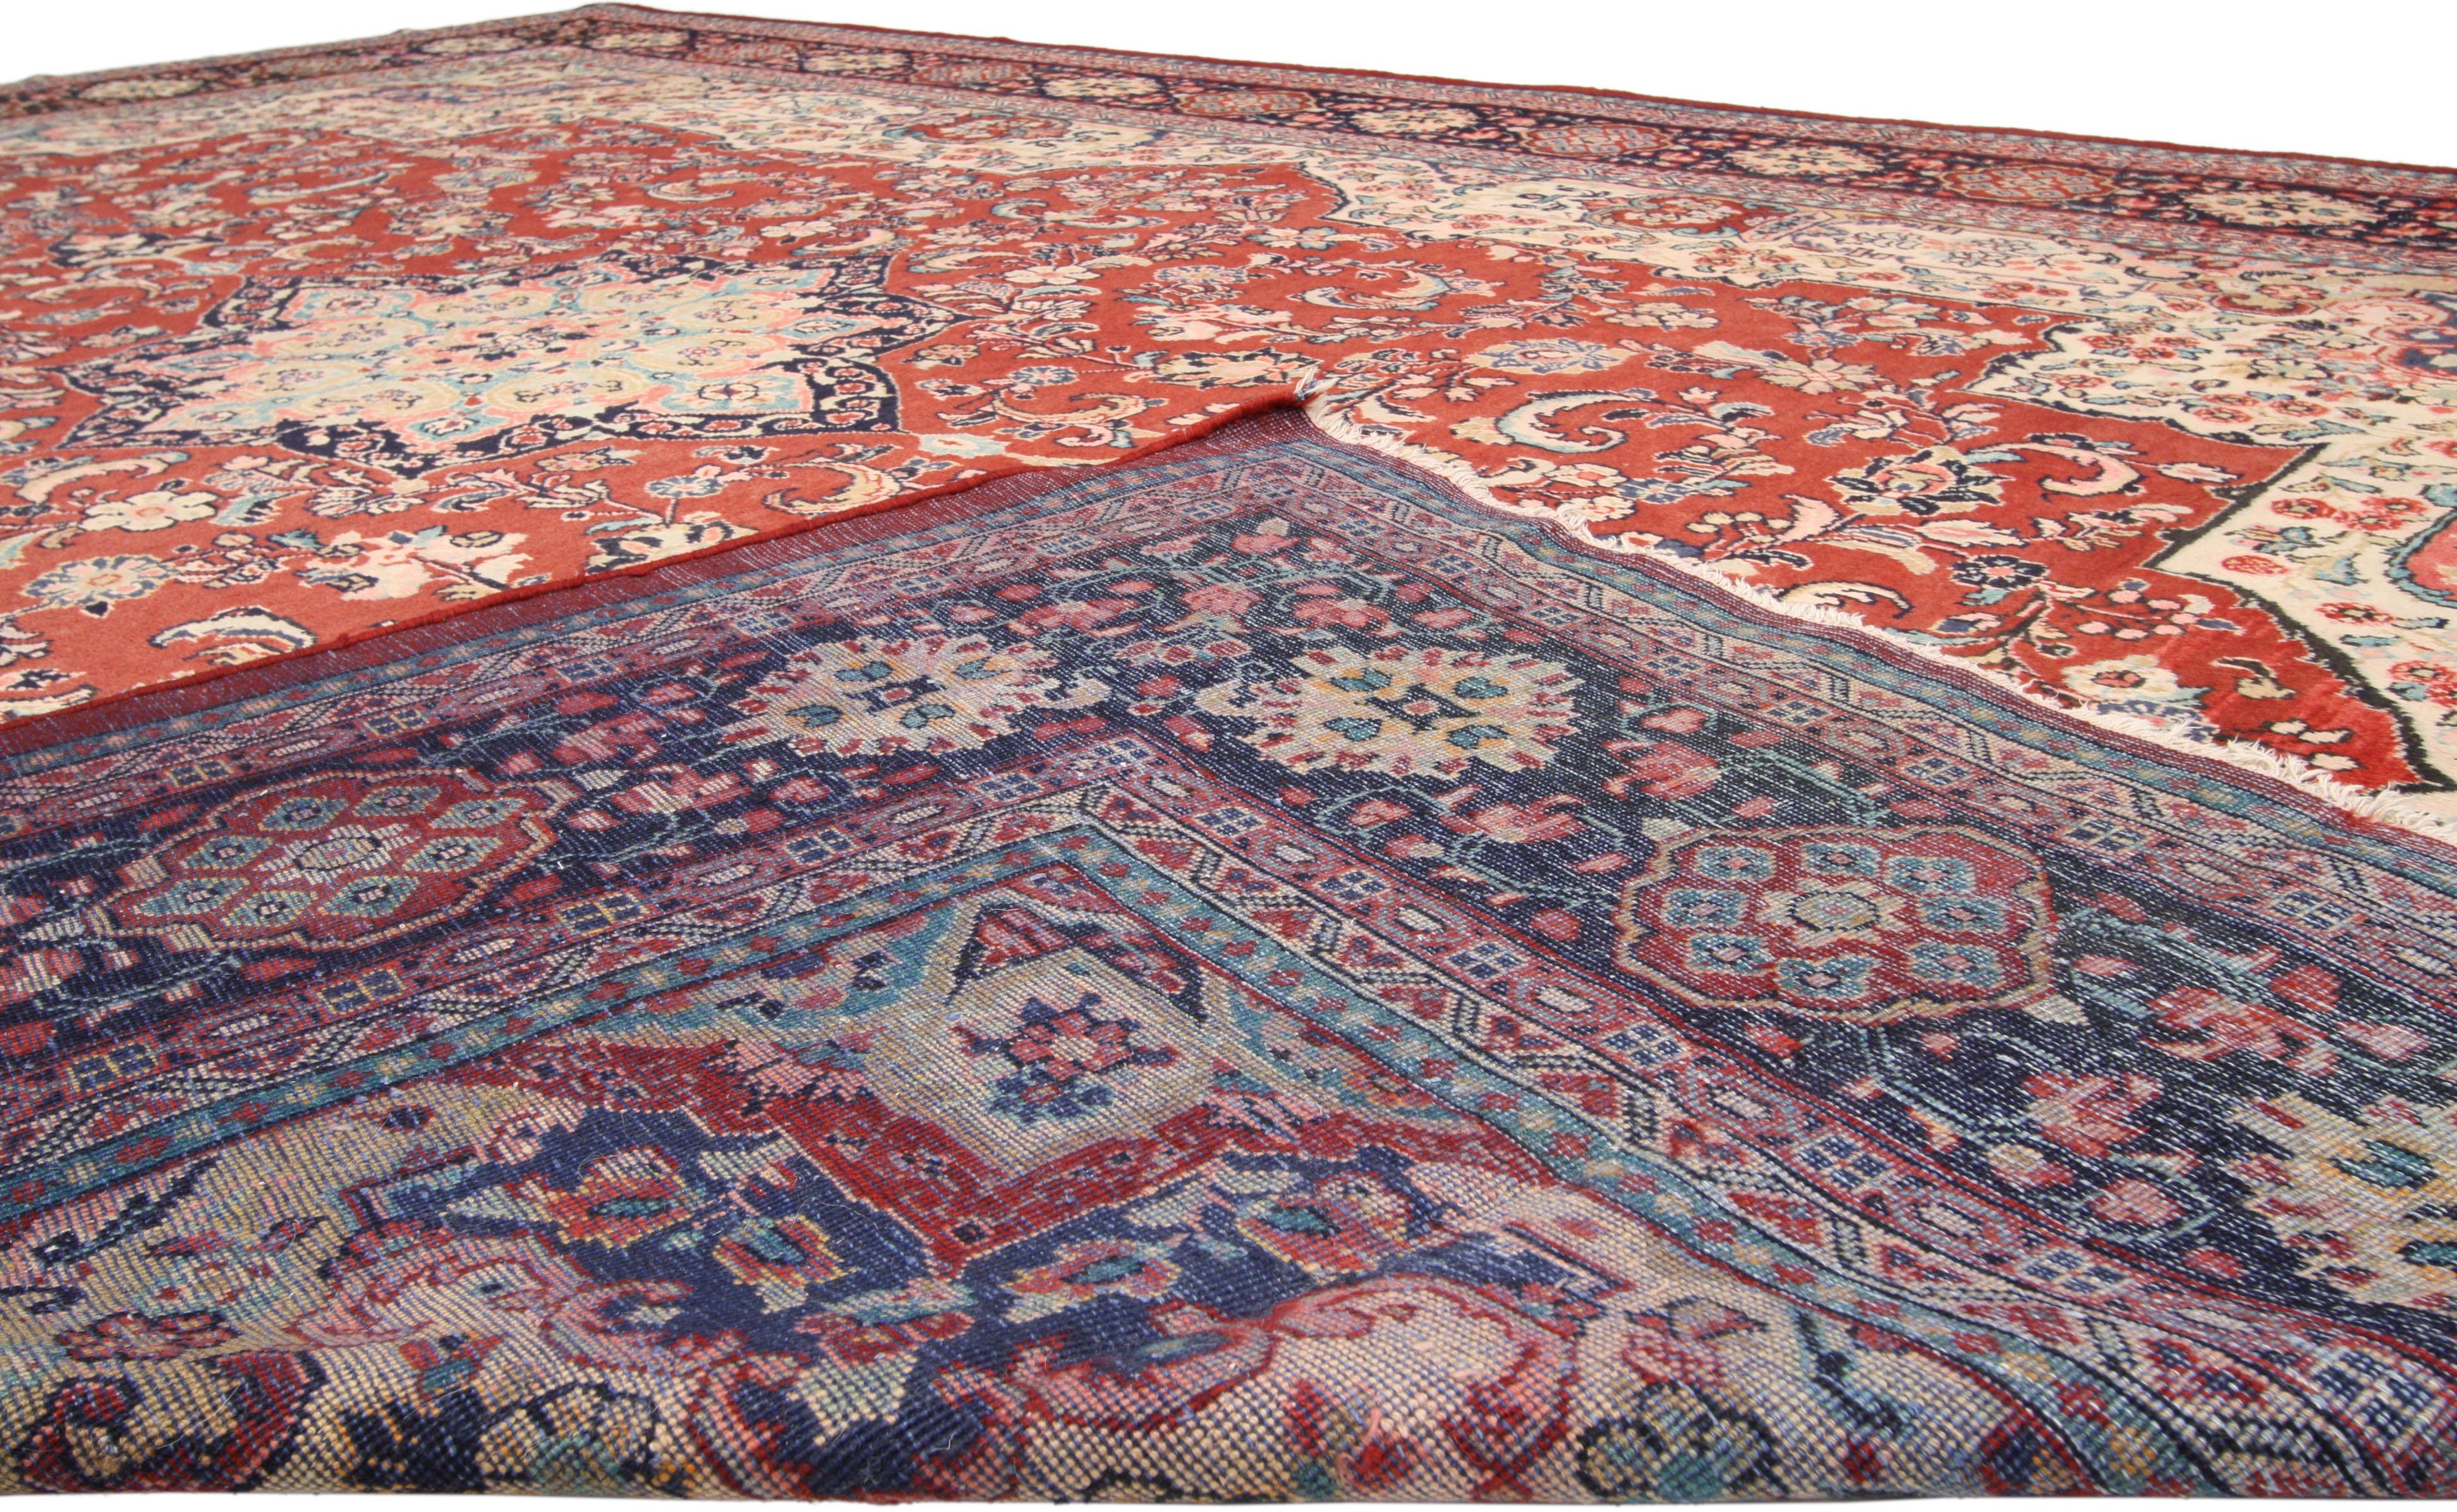 Hand-Knotted Vintage Persian Mahal Rug with Old World French Victorian Style